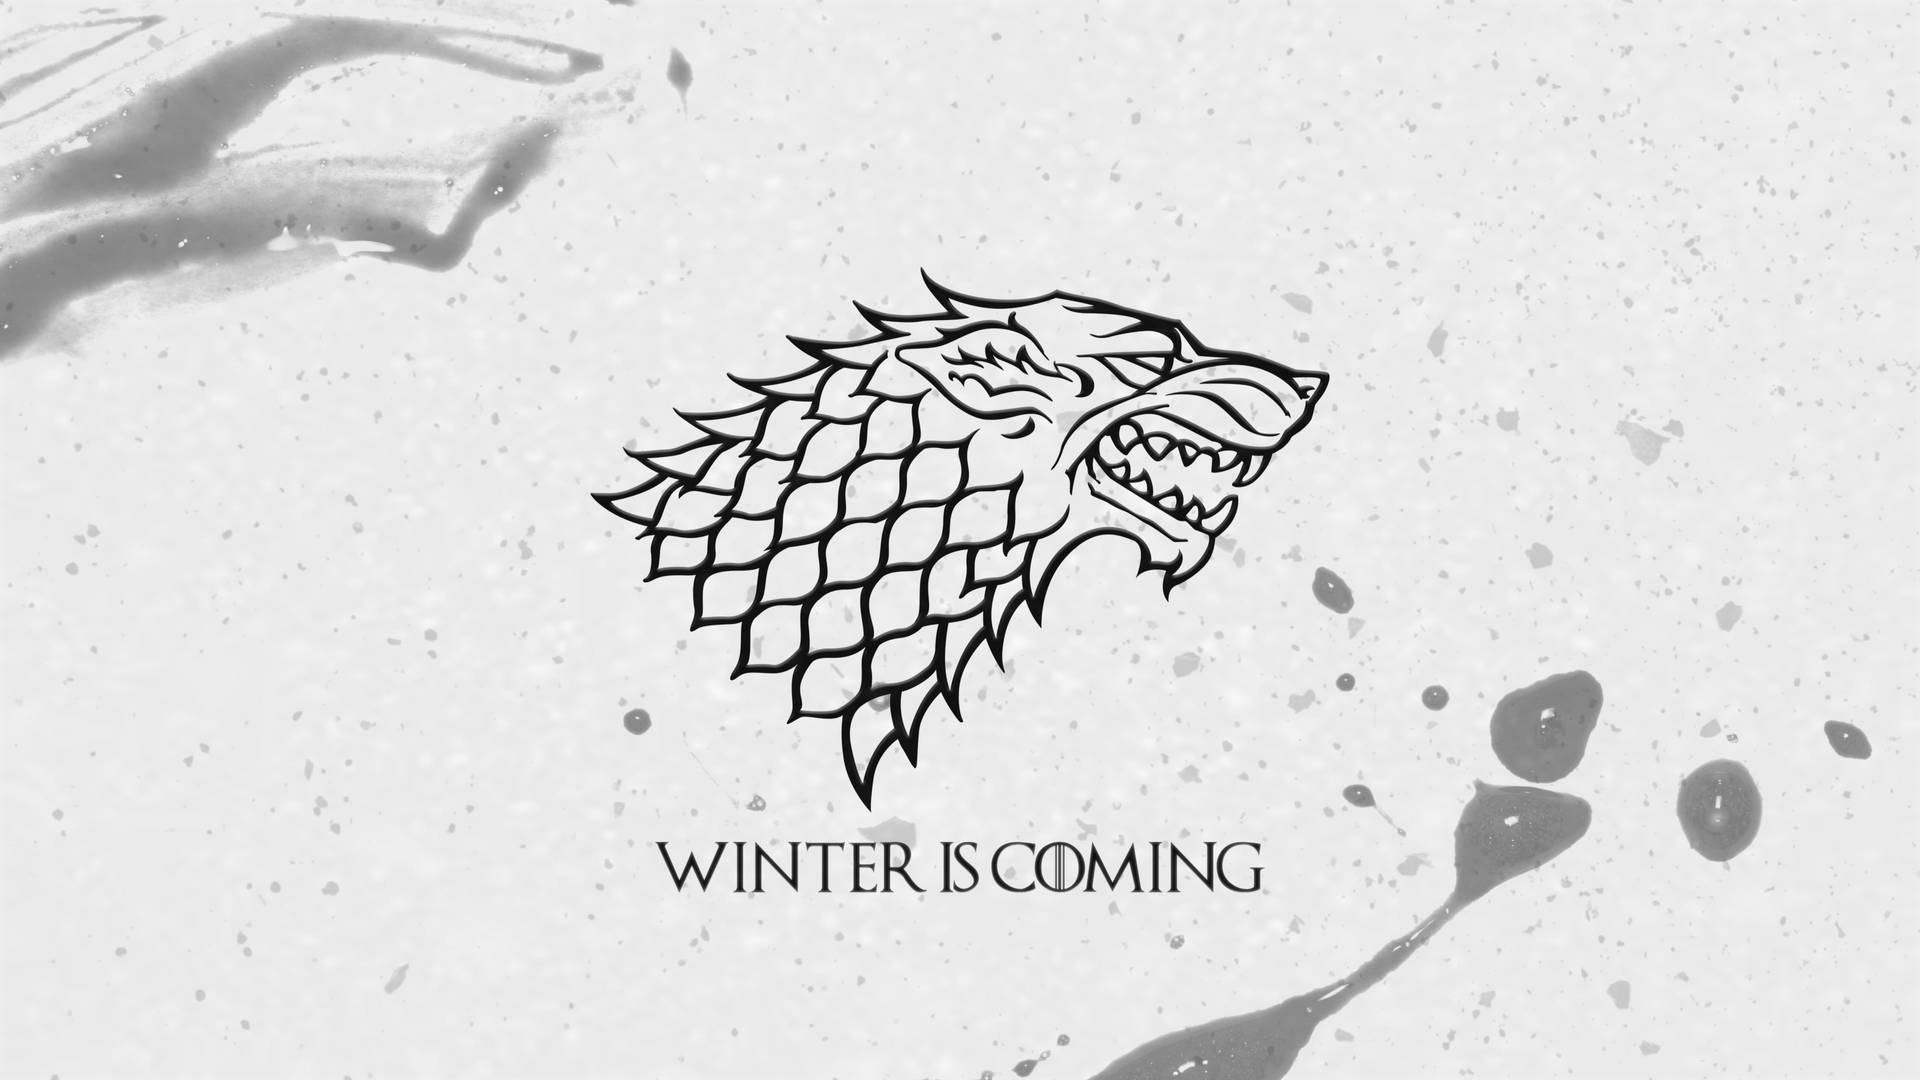 House Stark Winter Is Coming Fanart Background